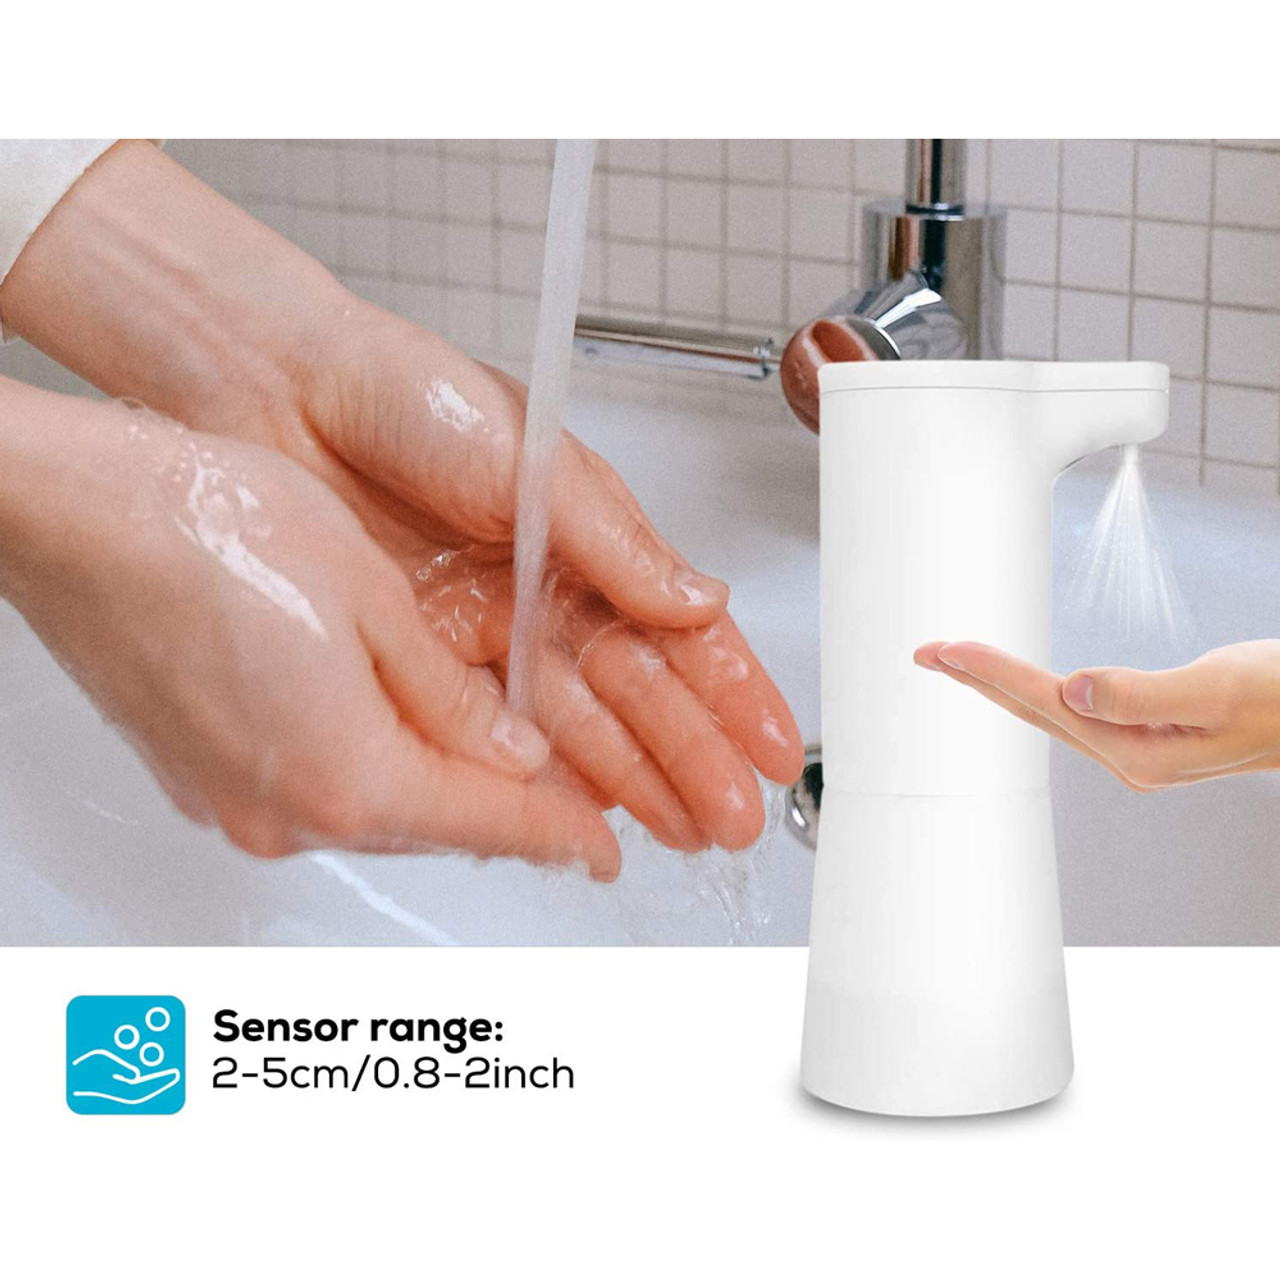 Infrared Automatic Hand Sanitizer Dispenser product image